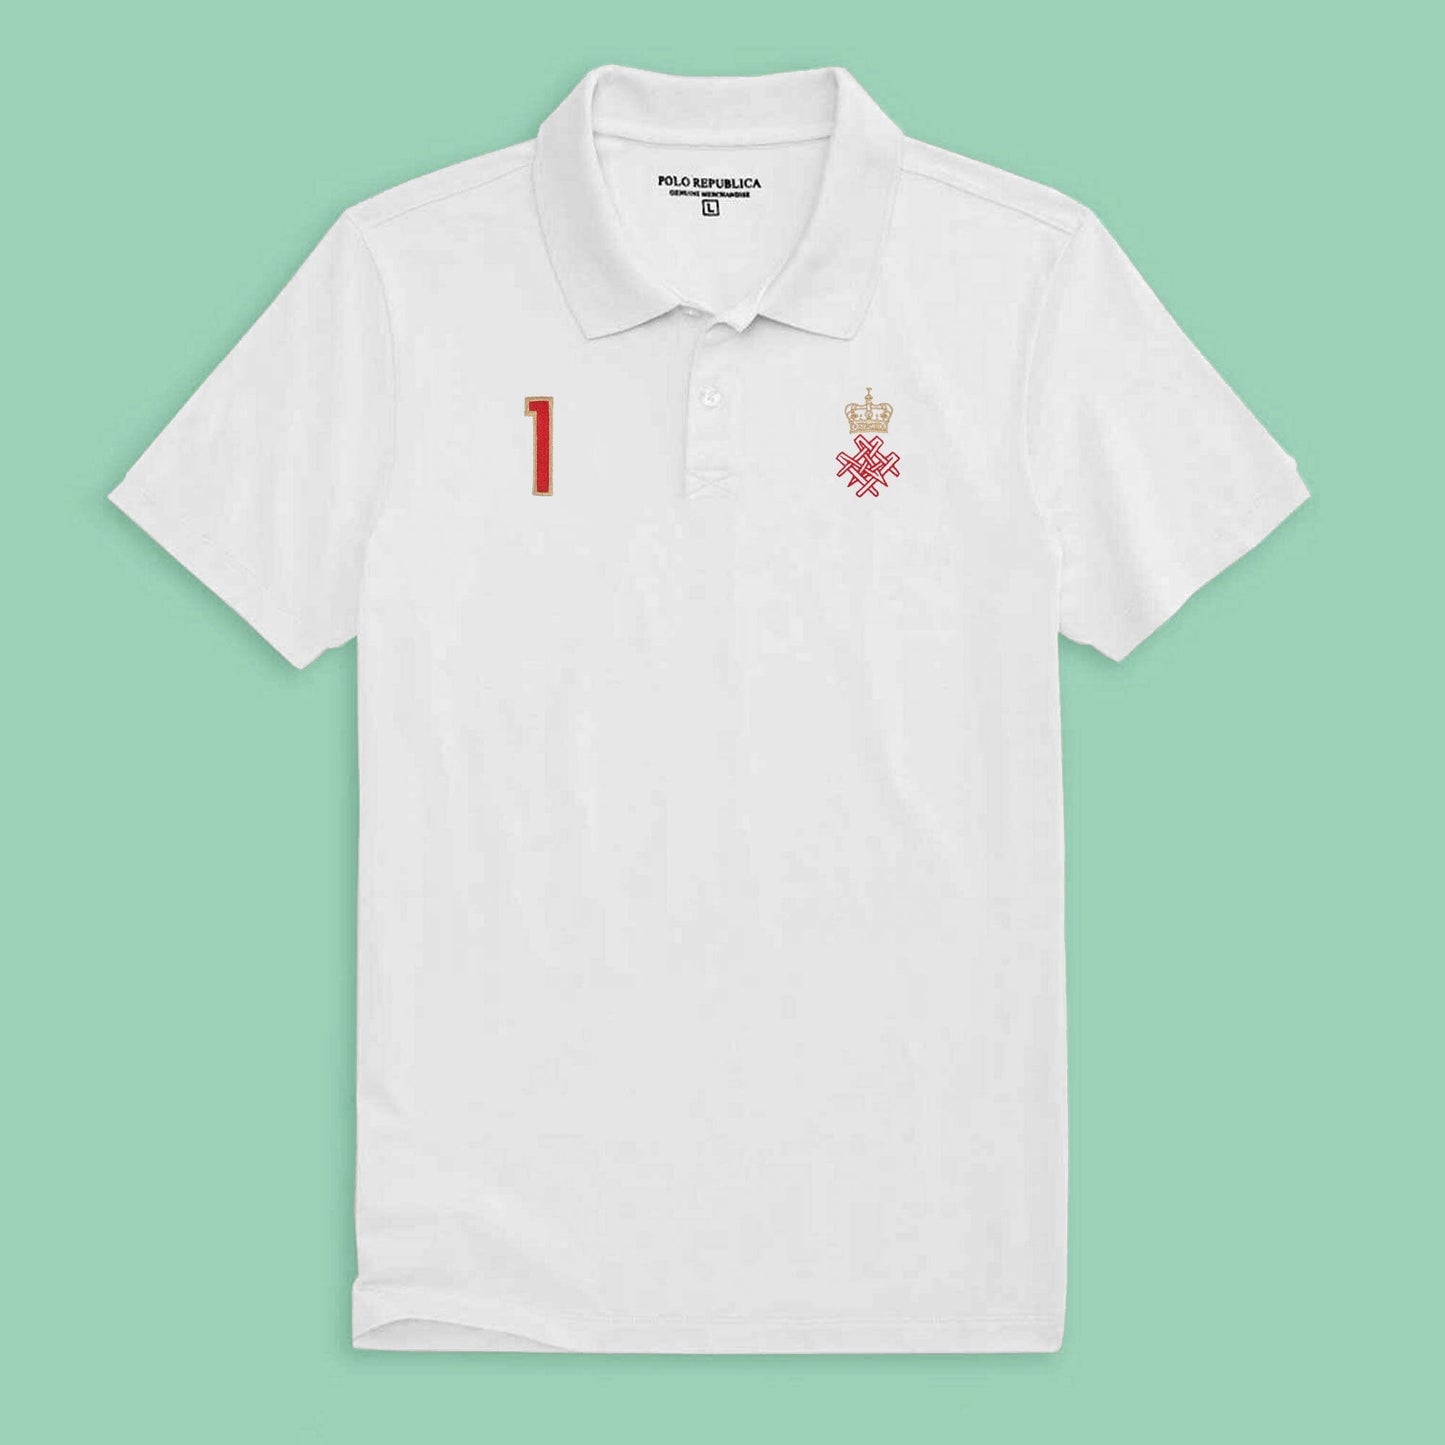 Polo Republica Men's Crown Emblem & 1 Embroidered Short Sleeve Polo Shirt